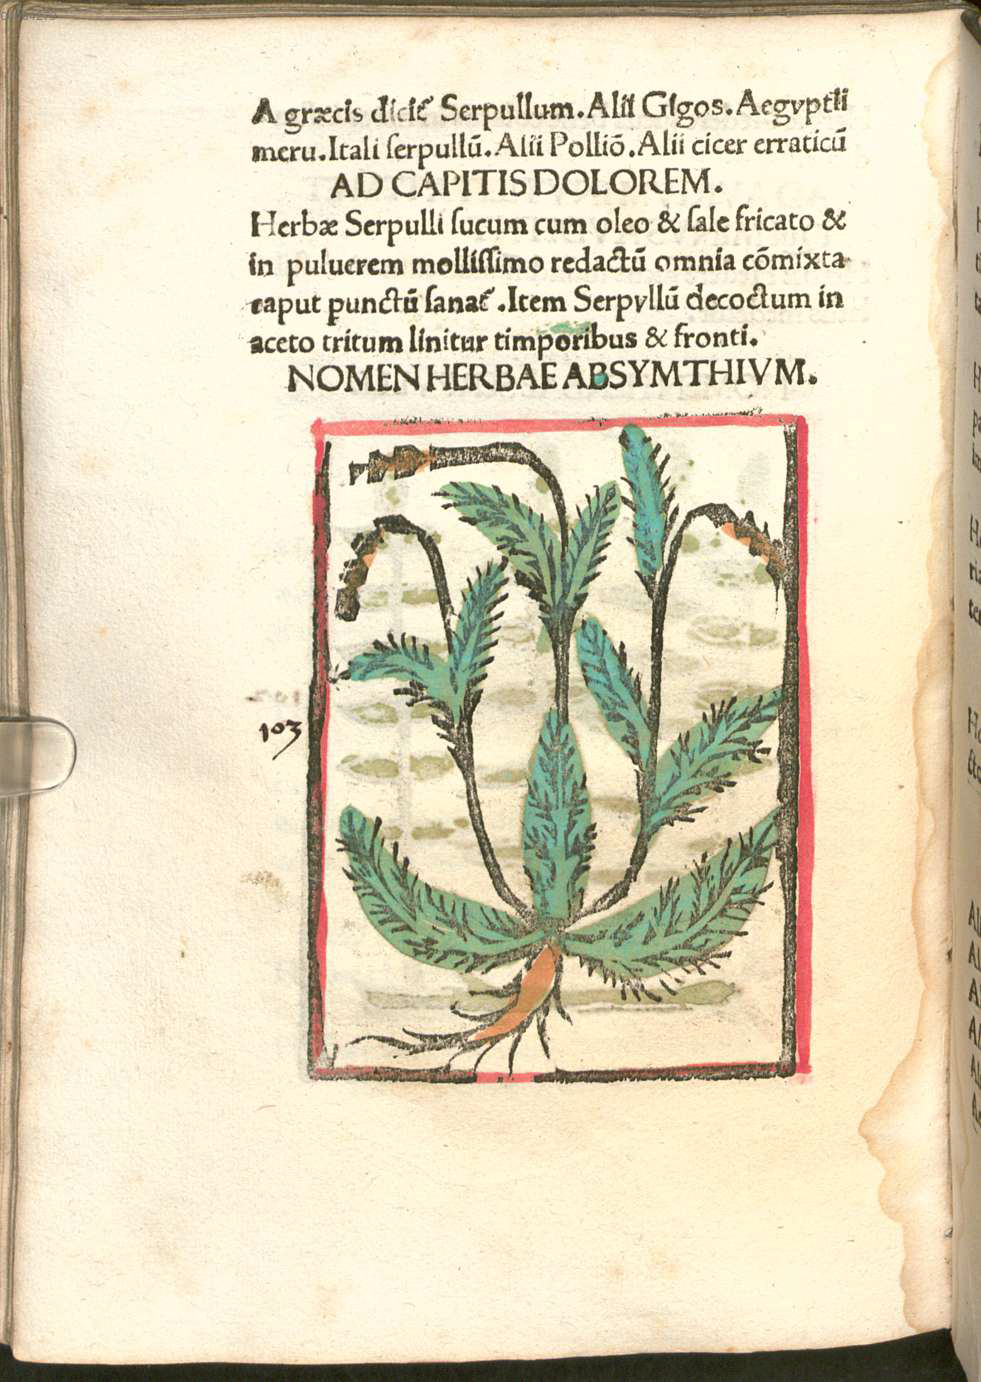 Detail of page from Herbarium apulei with illustration of herb.  Please click to view entire image.